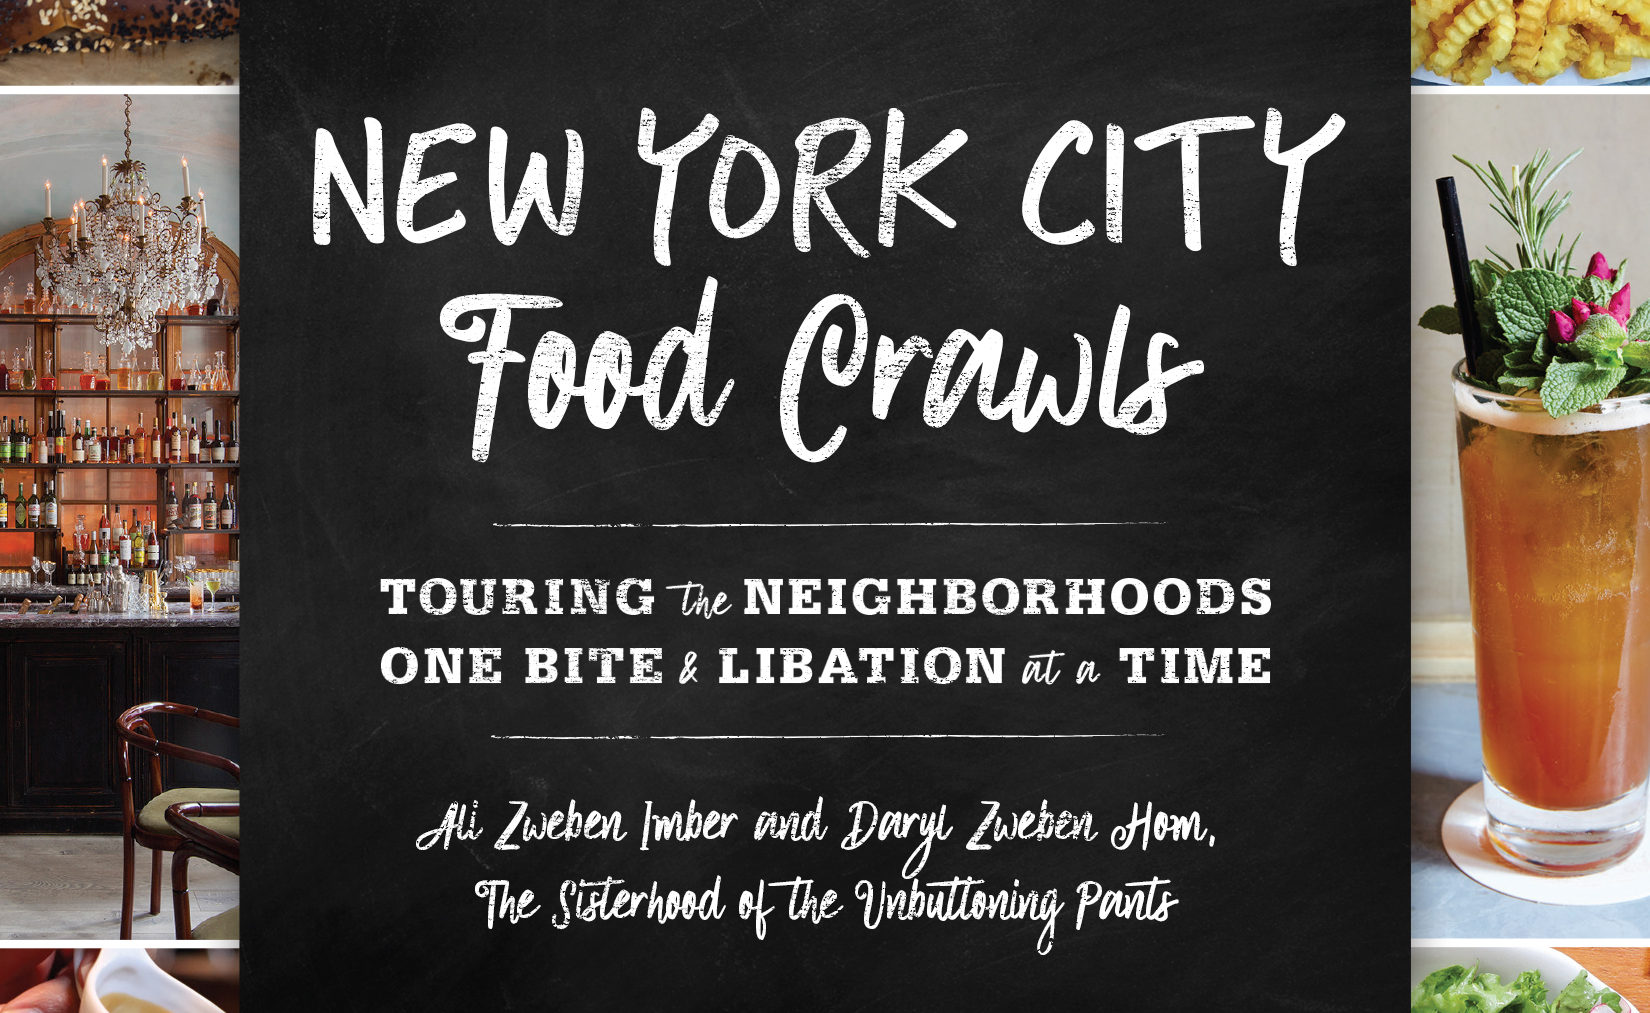 Bloggers take readers on NYC food crawl with new book